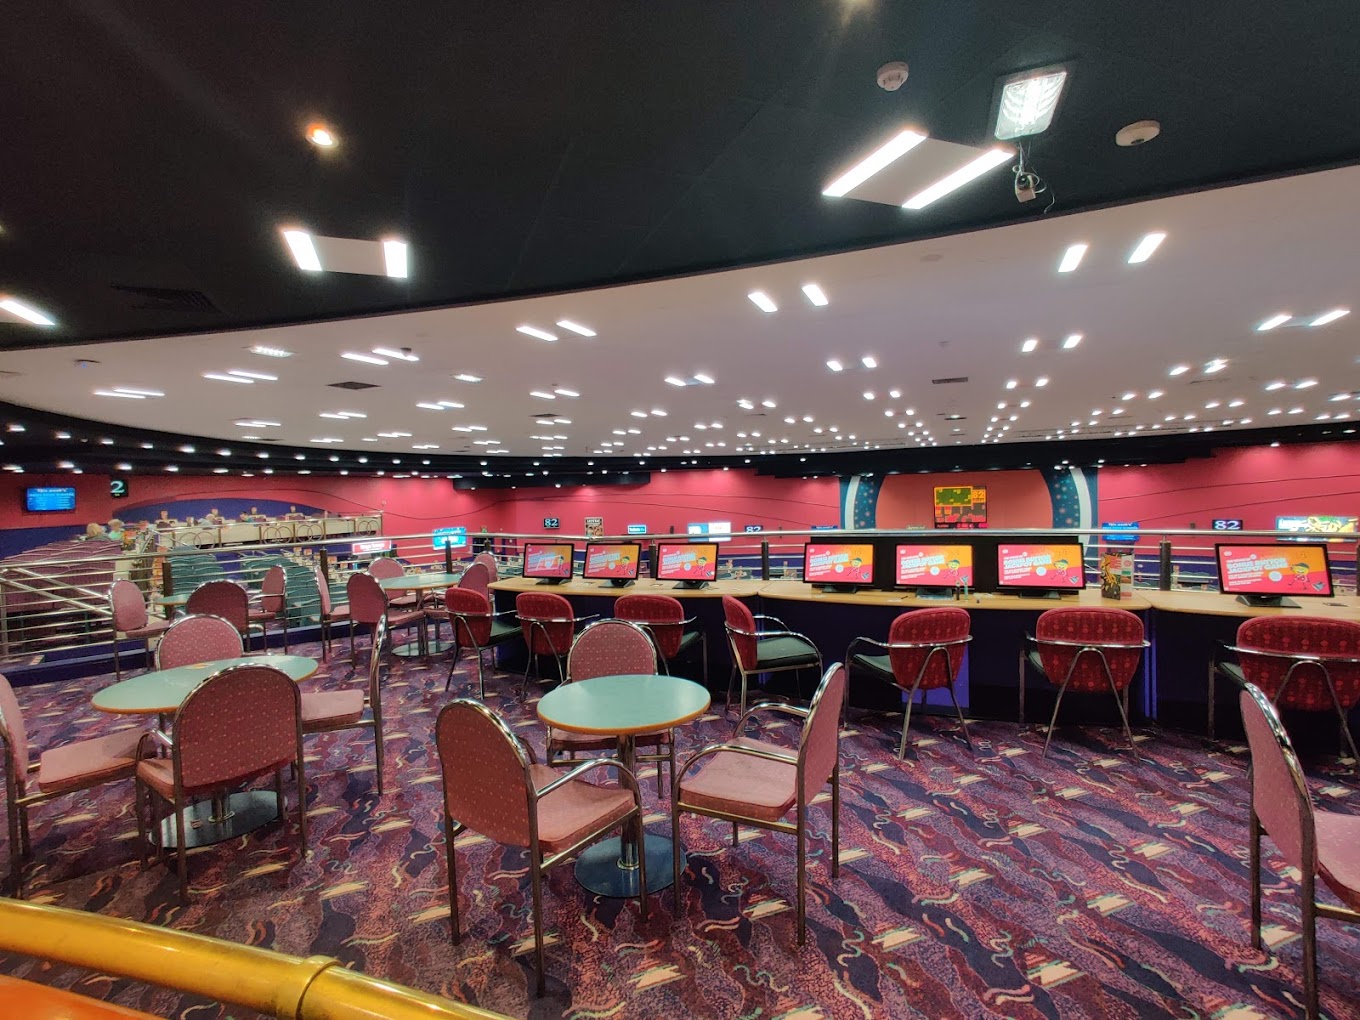 Images Buzz Bingo and The Slots Room Middlesbrough